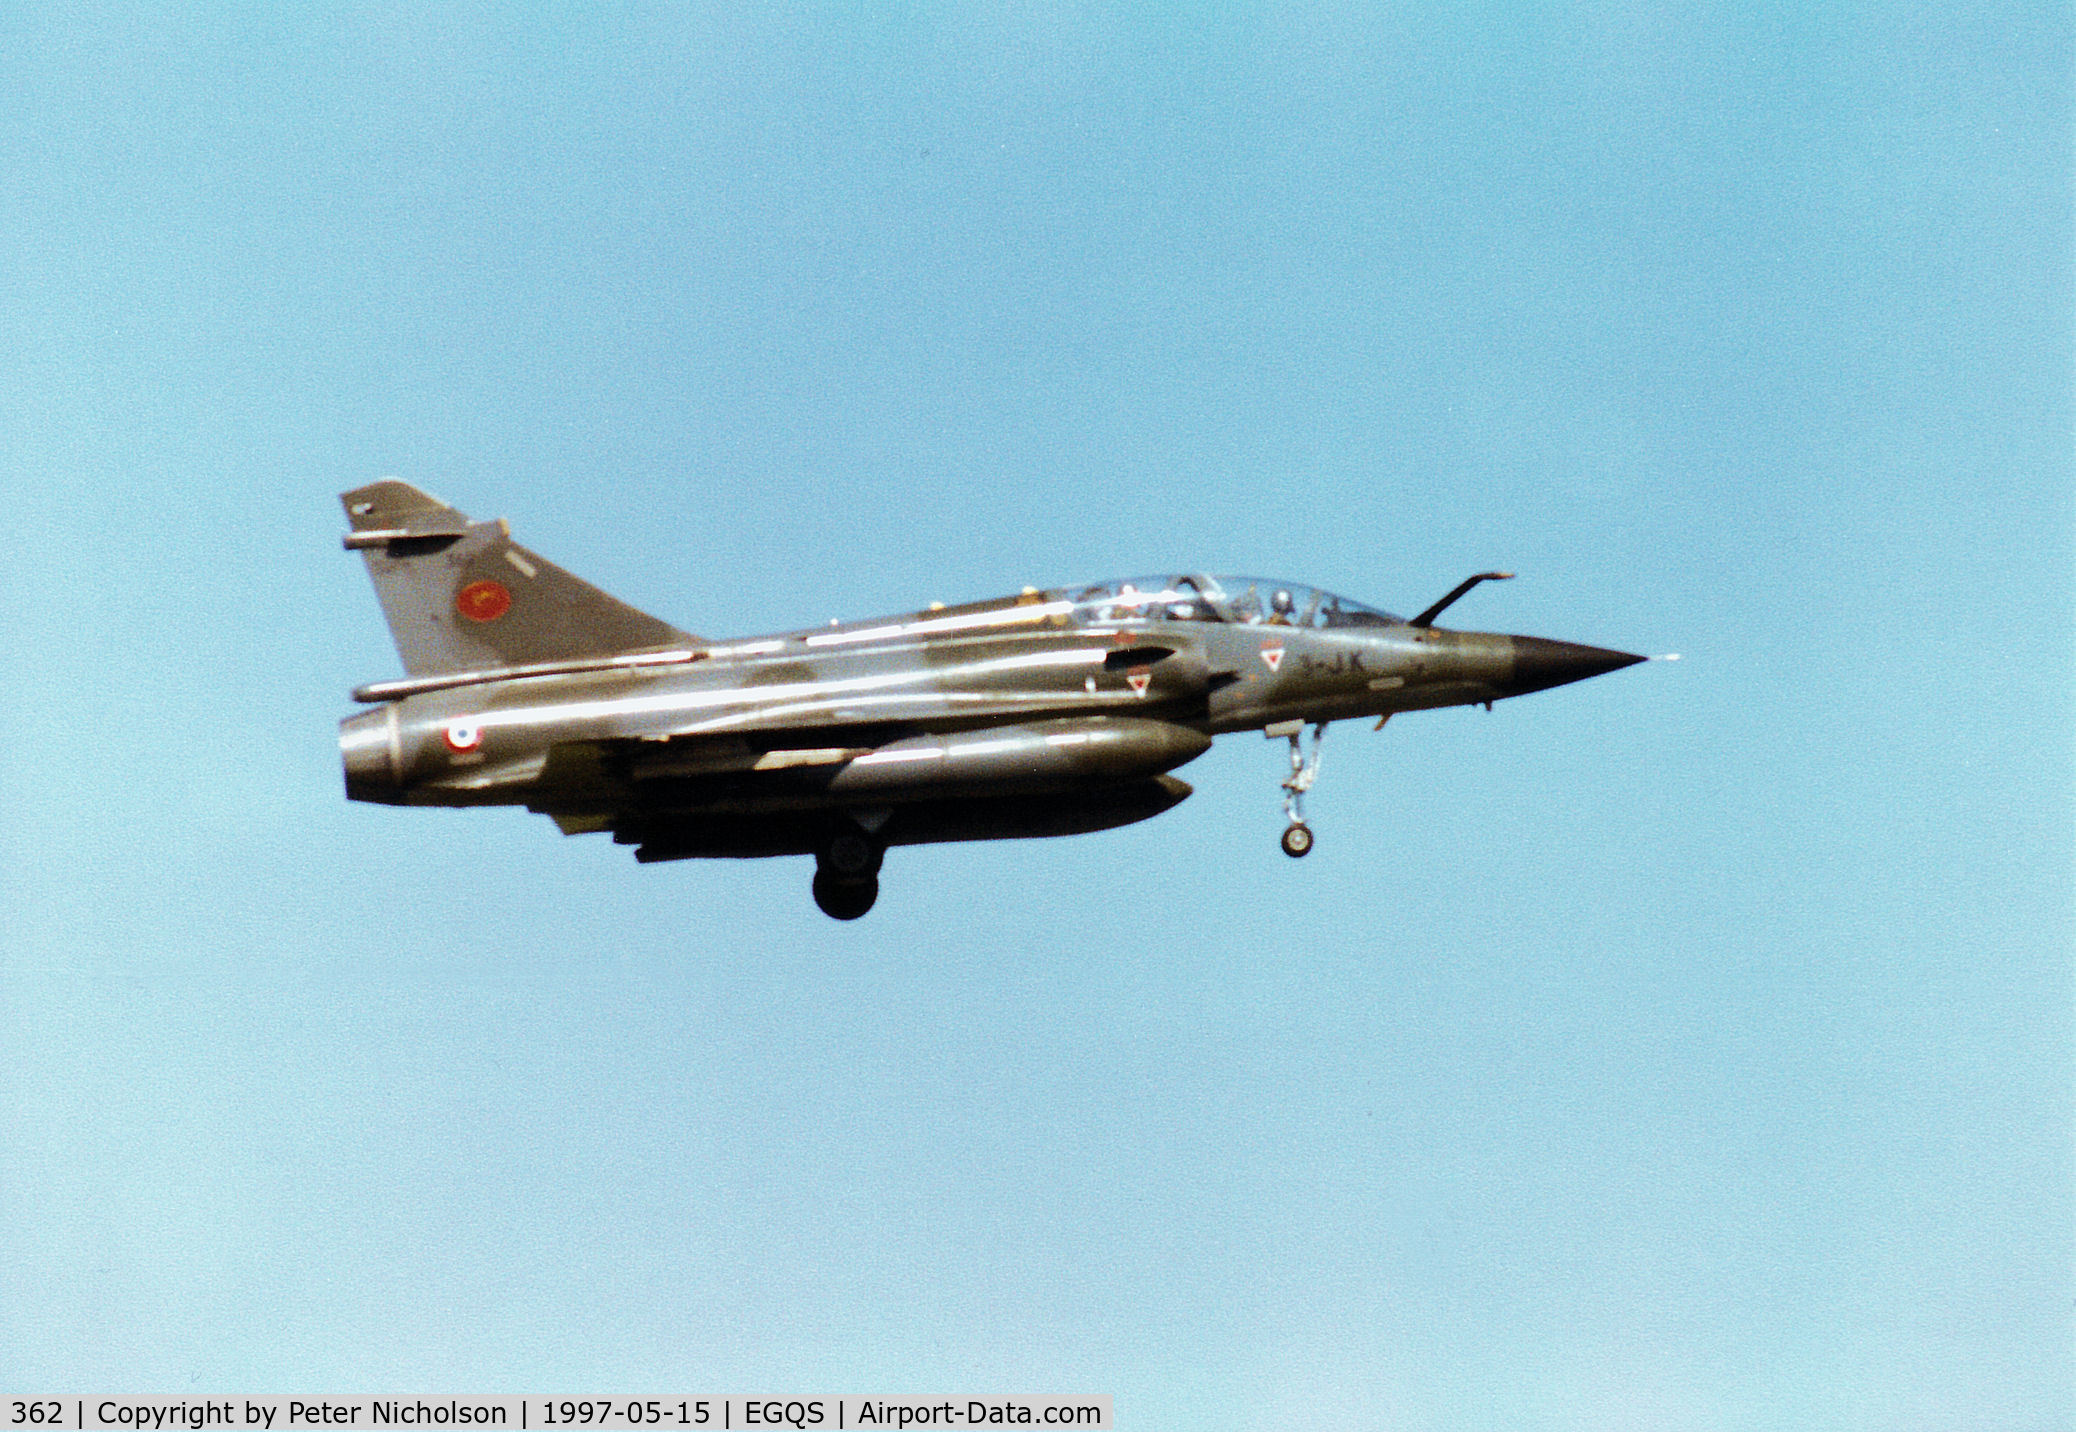 362, Dassault Mirage 2000N C/N 347, Mirage 2000N, callsign French Air Force 7231 Bravo, on finals for Runway 05 at RAF Lossiemouth in May 1997.